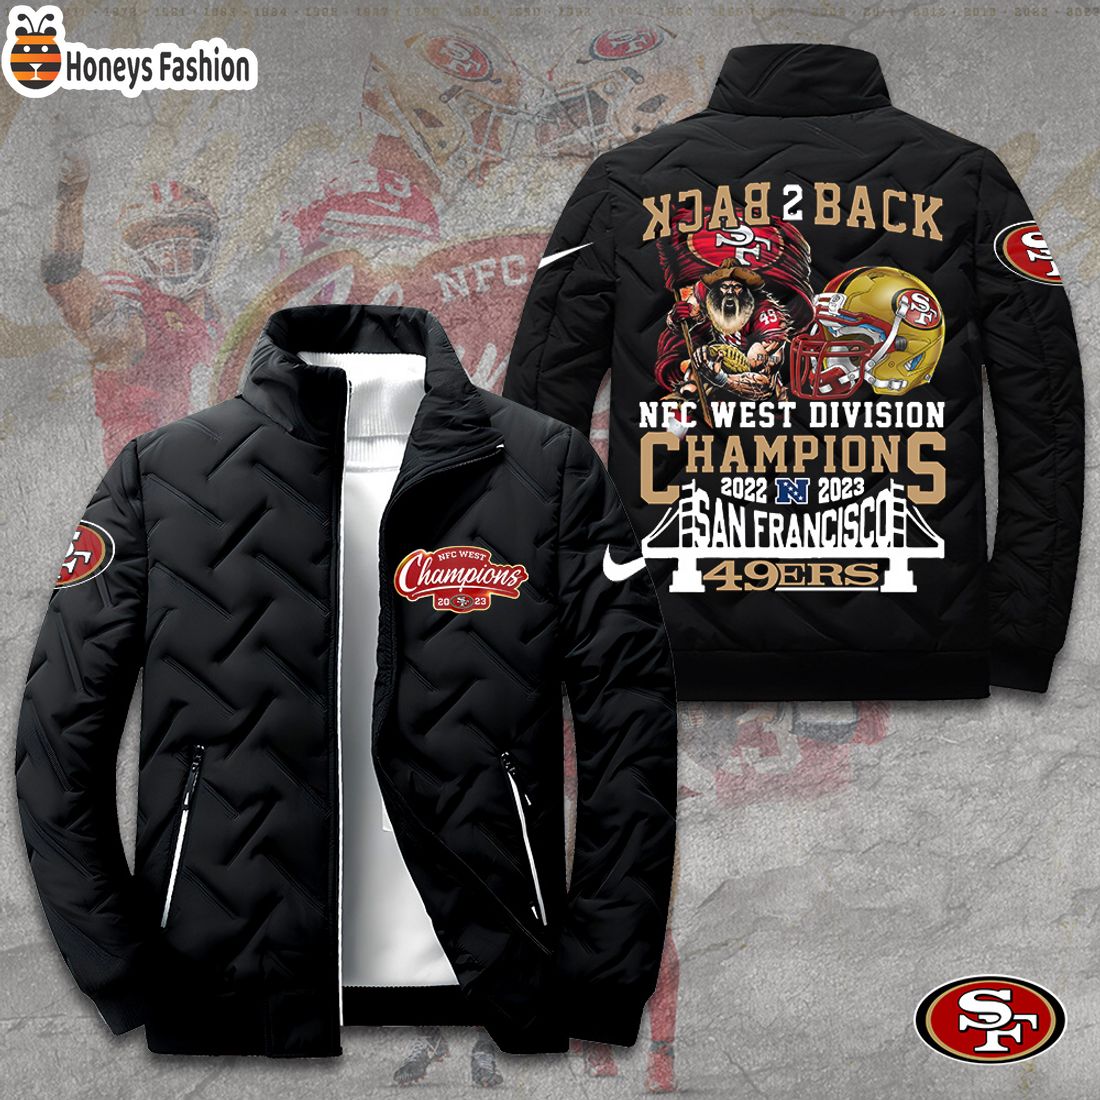 NEW San Francisco 49ers Back 2 Back NFC West Division Champions 2D Paddle Jacket